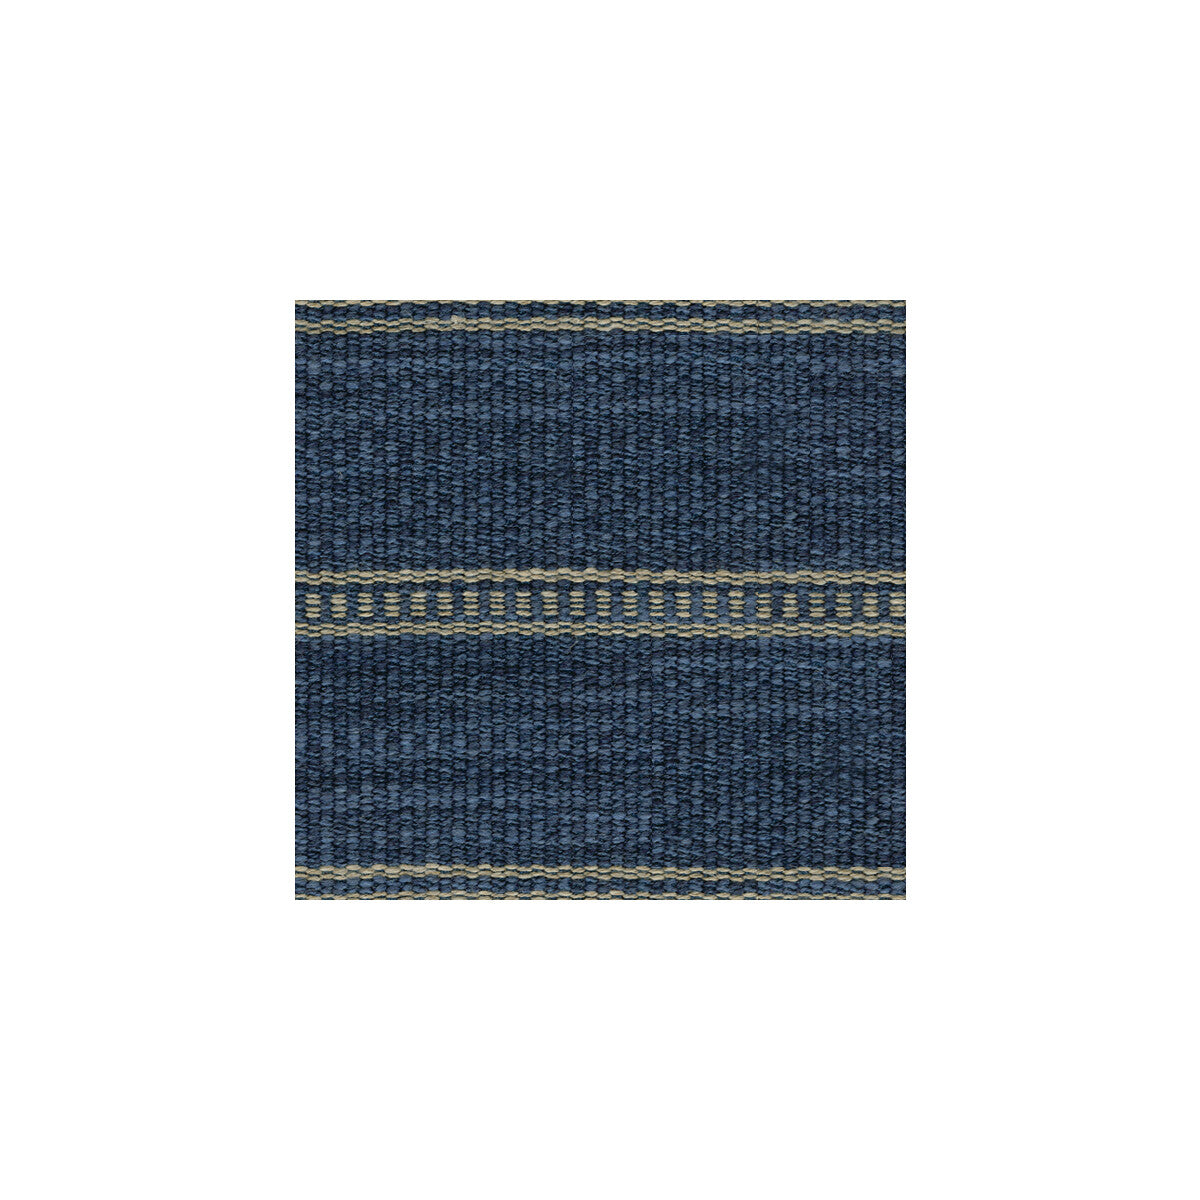 Saddle Stripe fabric in indigo color - pattern 31511.516.0 - by Kravet Couture in the Nomad Chic collection